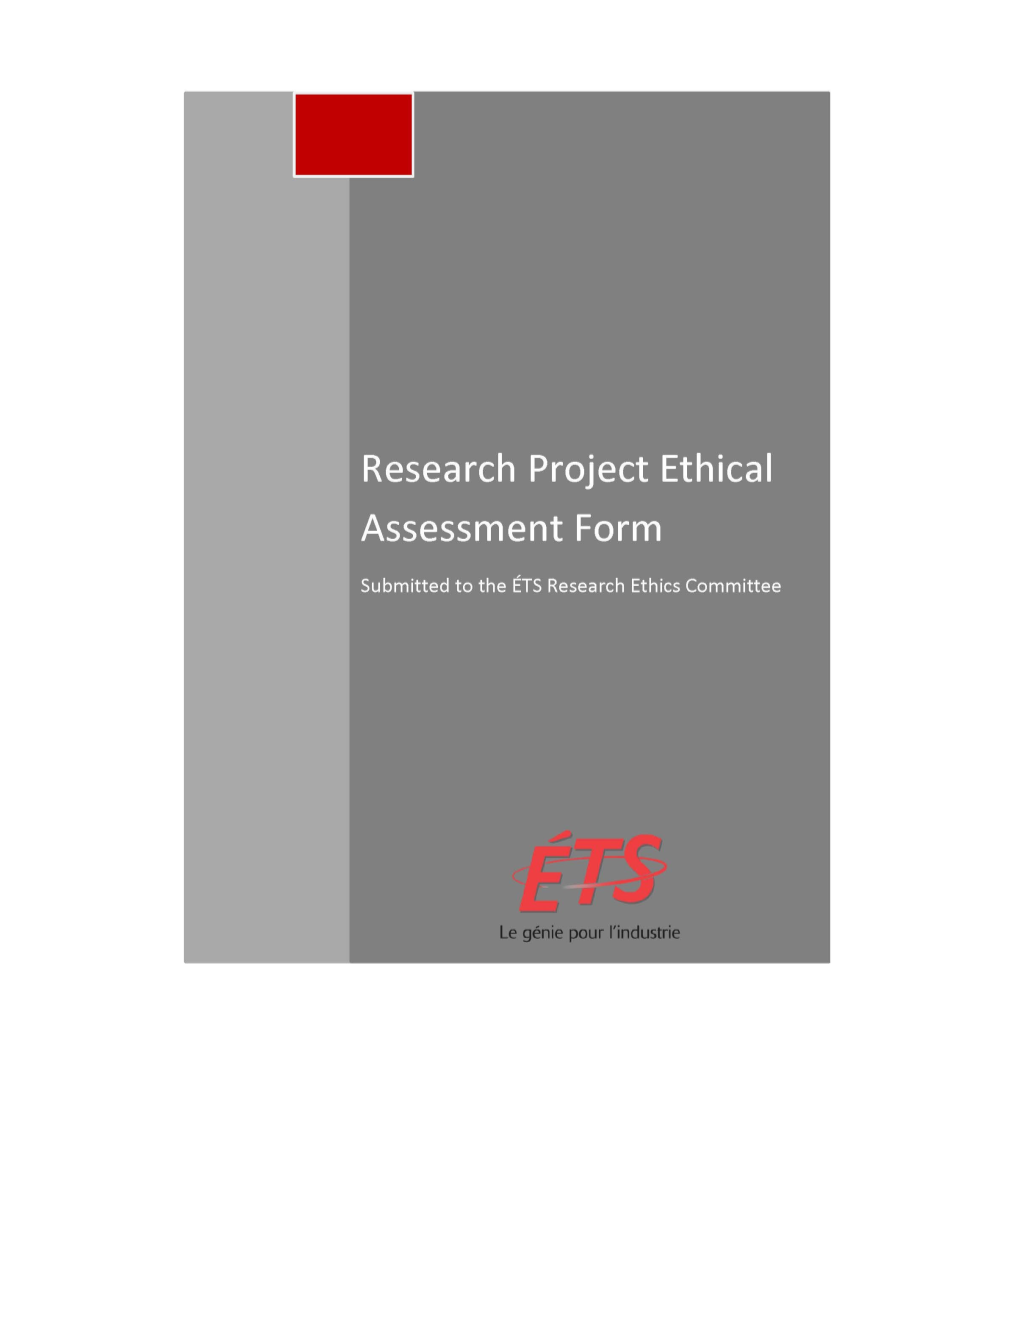 Researchers Who Submit a Research Project for Approval by the ÉTS Research Ethics Committee